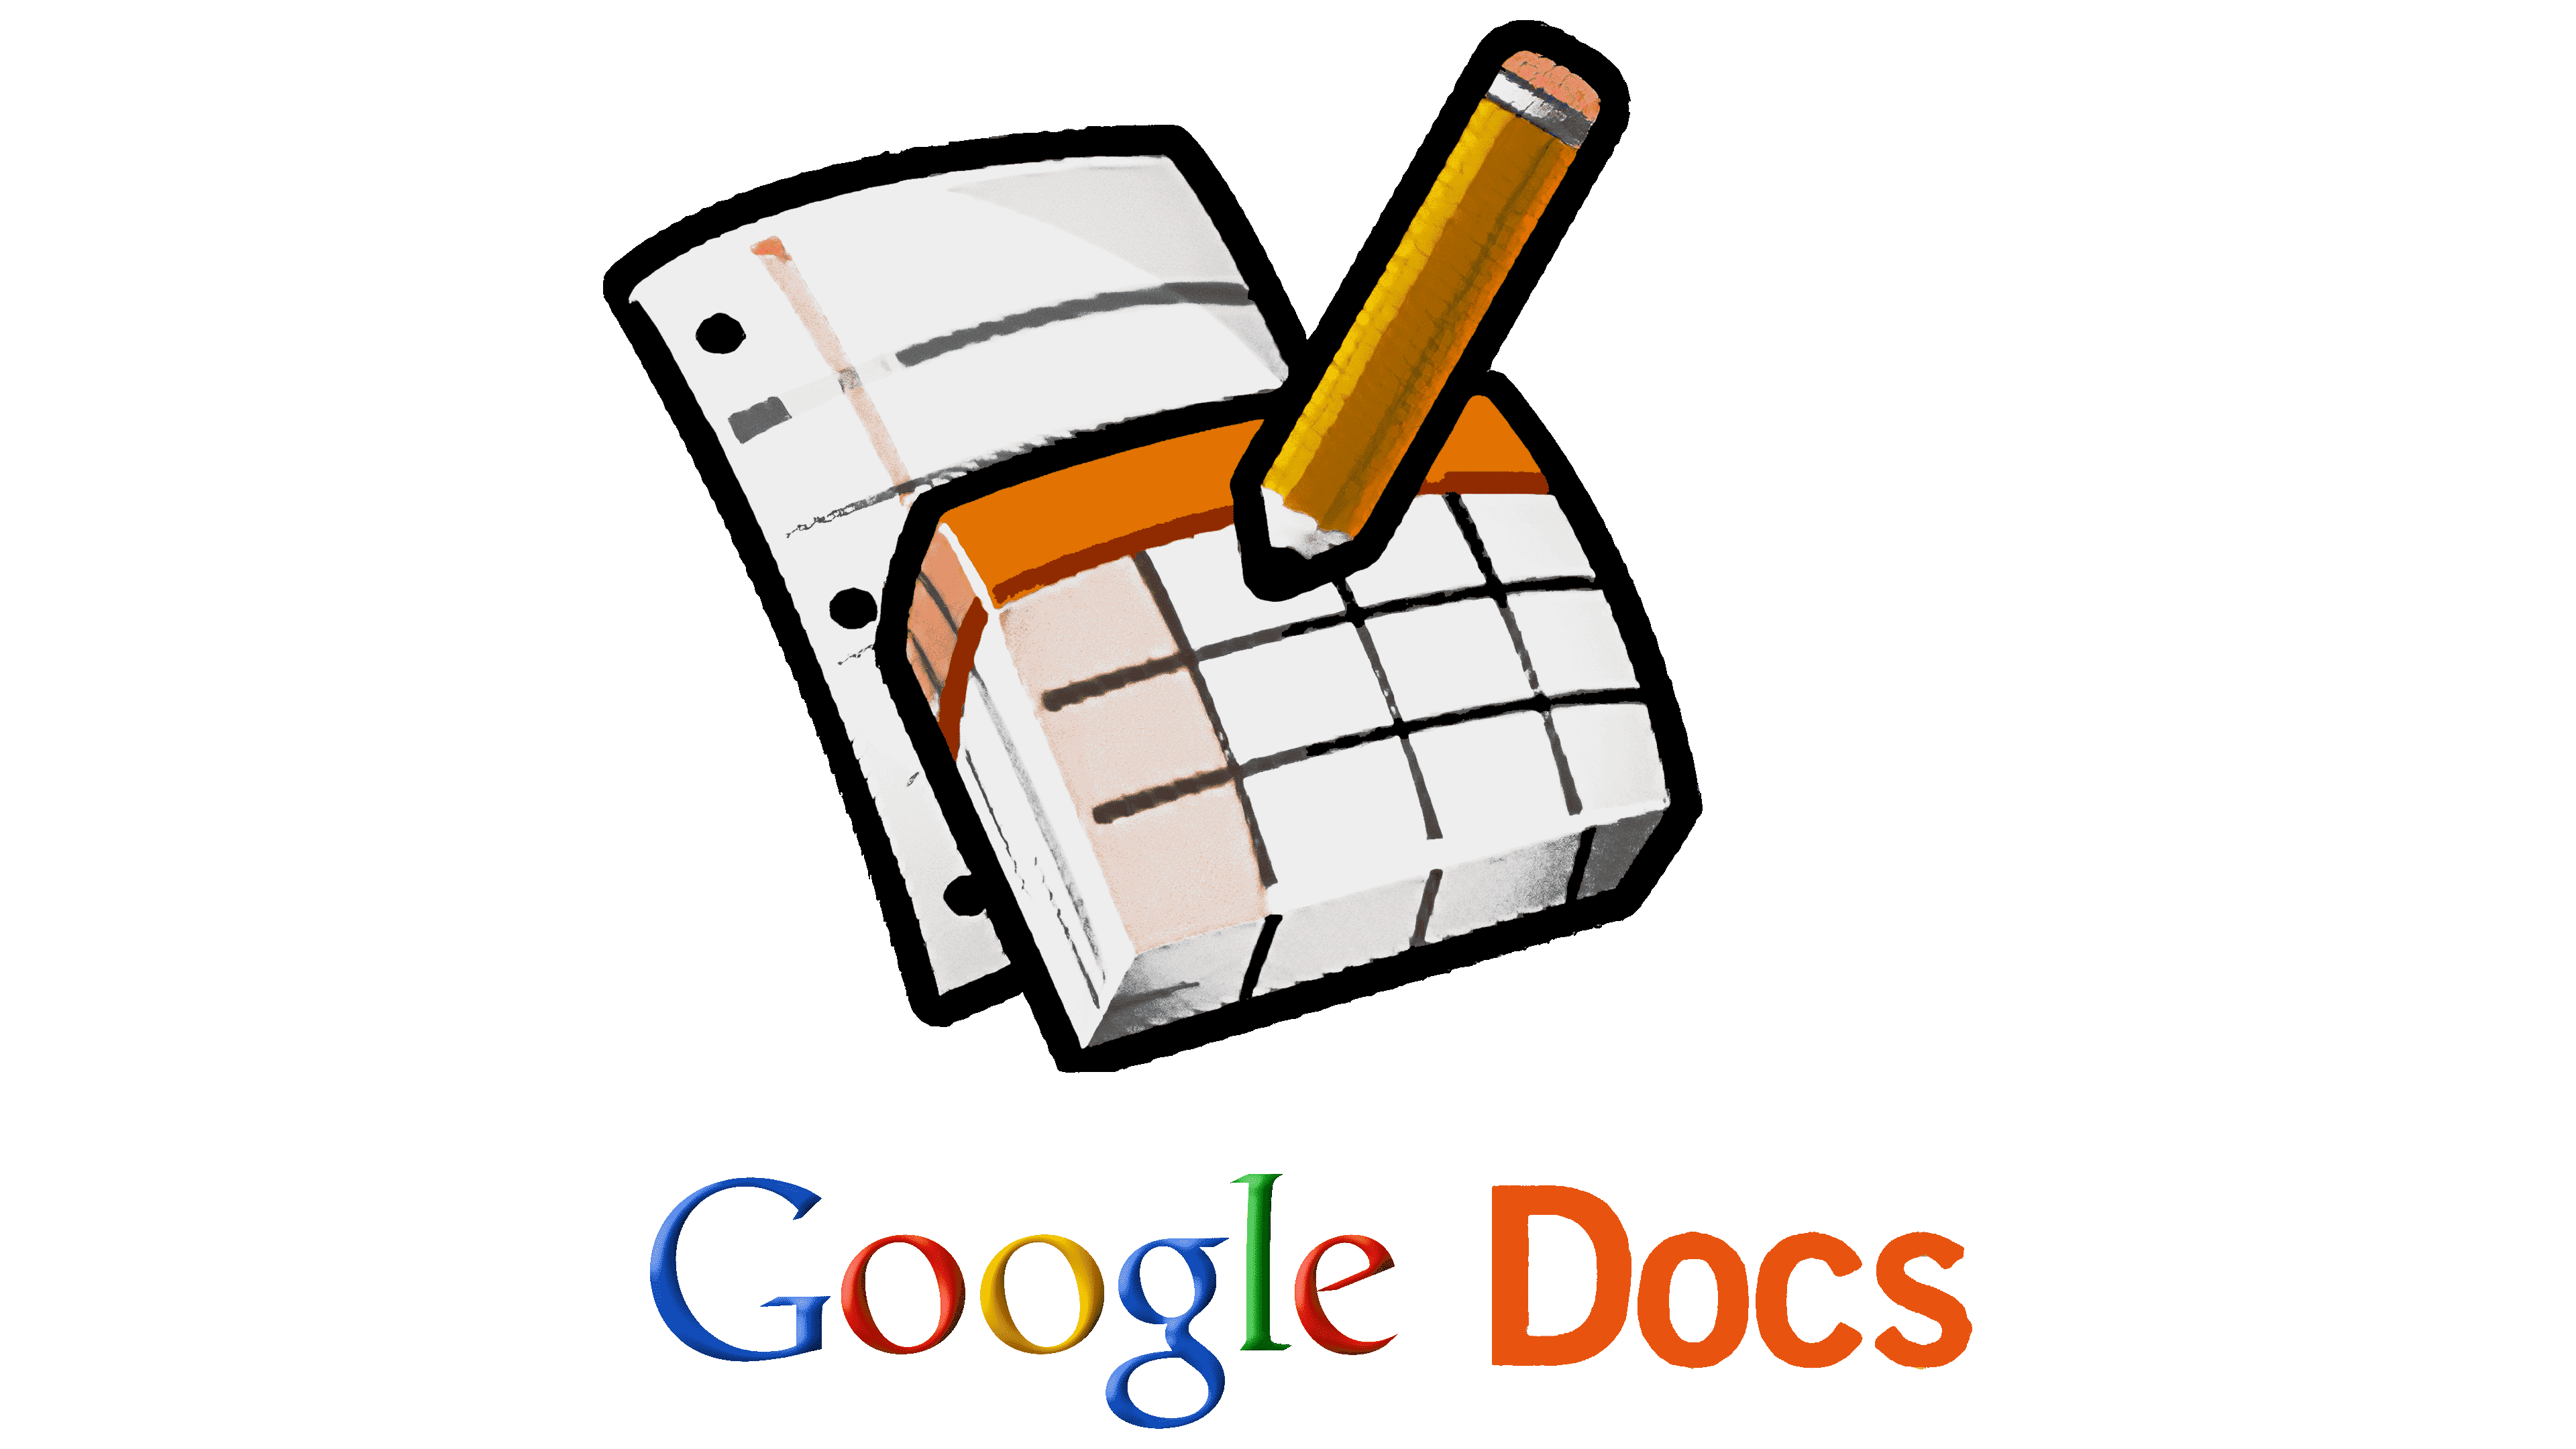 11 Hidden Google Docs Features Every User Should Know